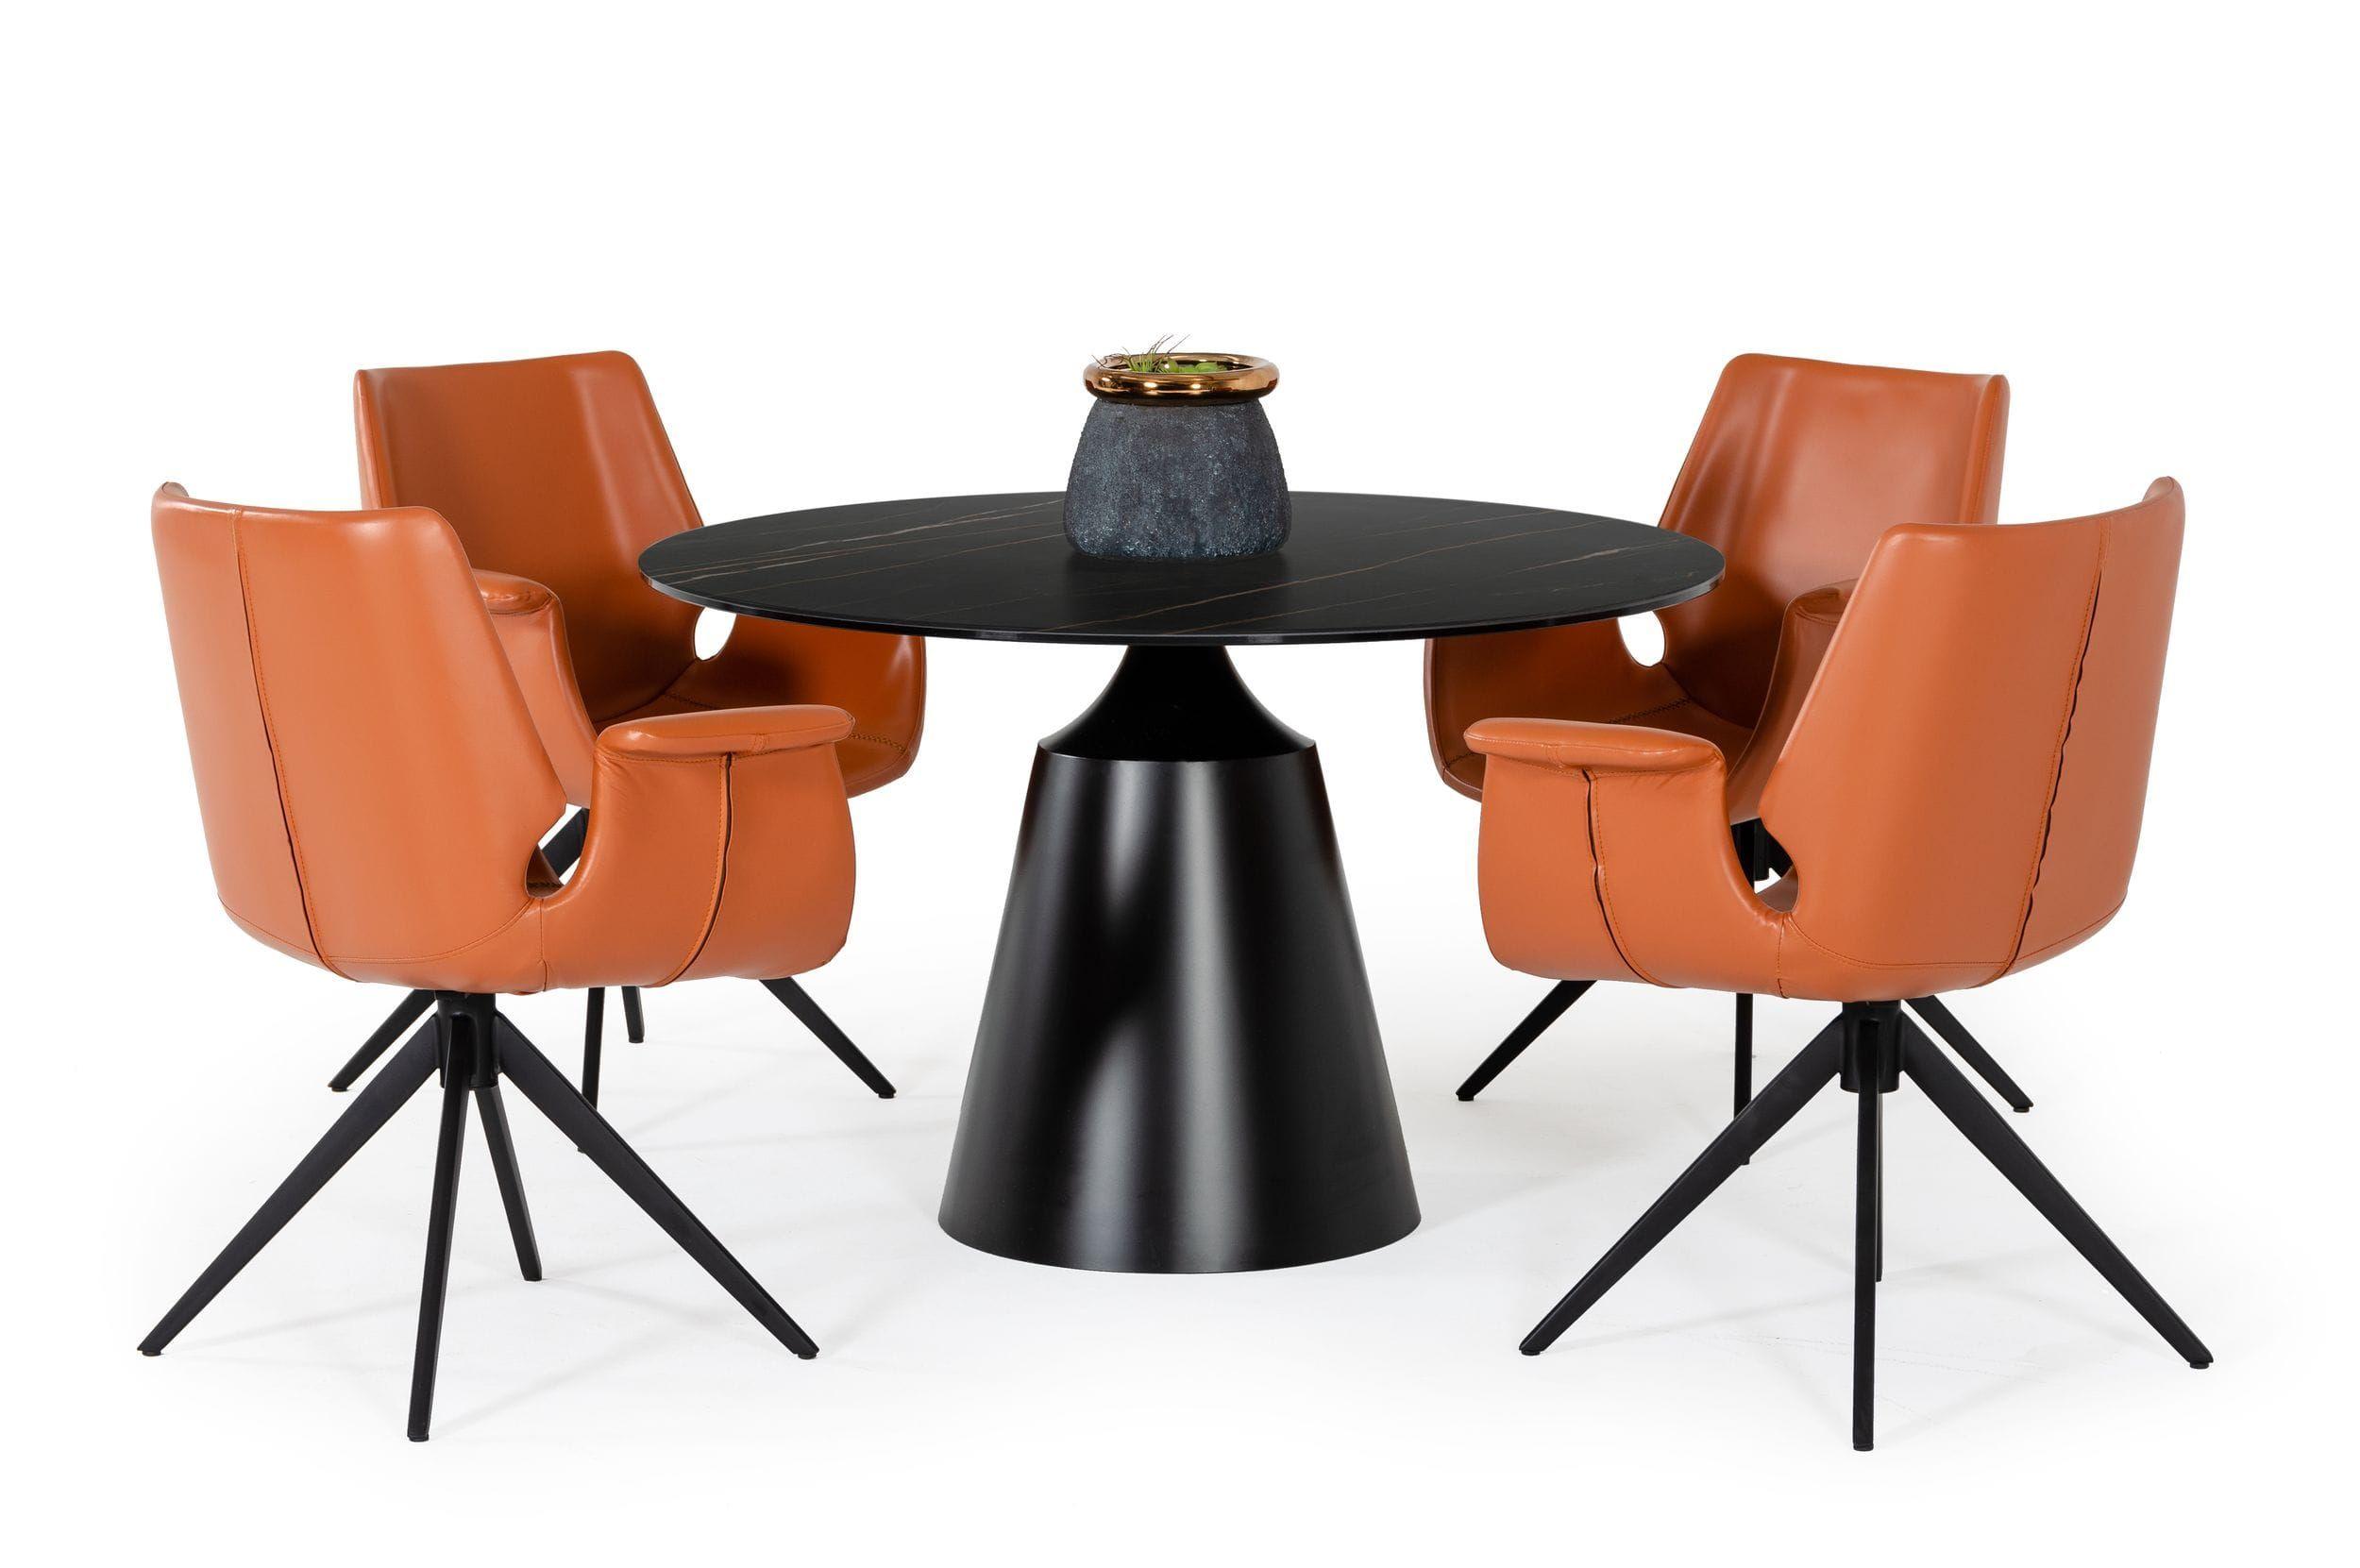 Contemporary, Modern Dining Room Set Edith Hiawatha VGNSGD8744-B-DT-5pcs in Black Eco-Leather